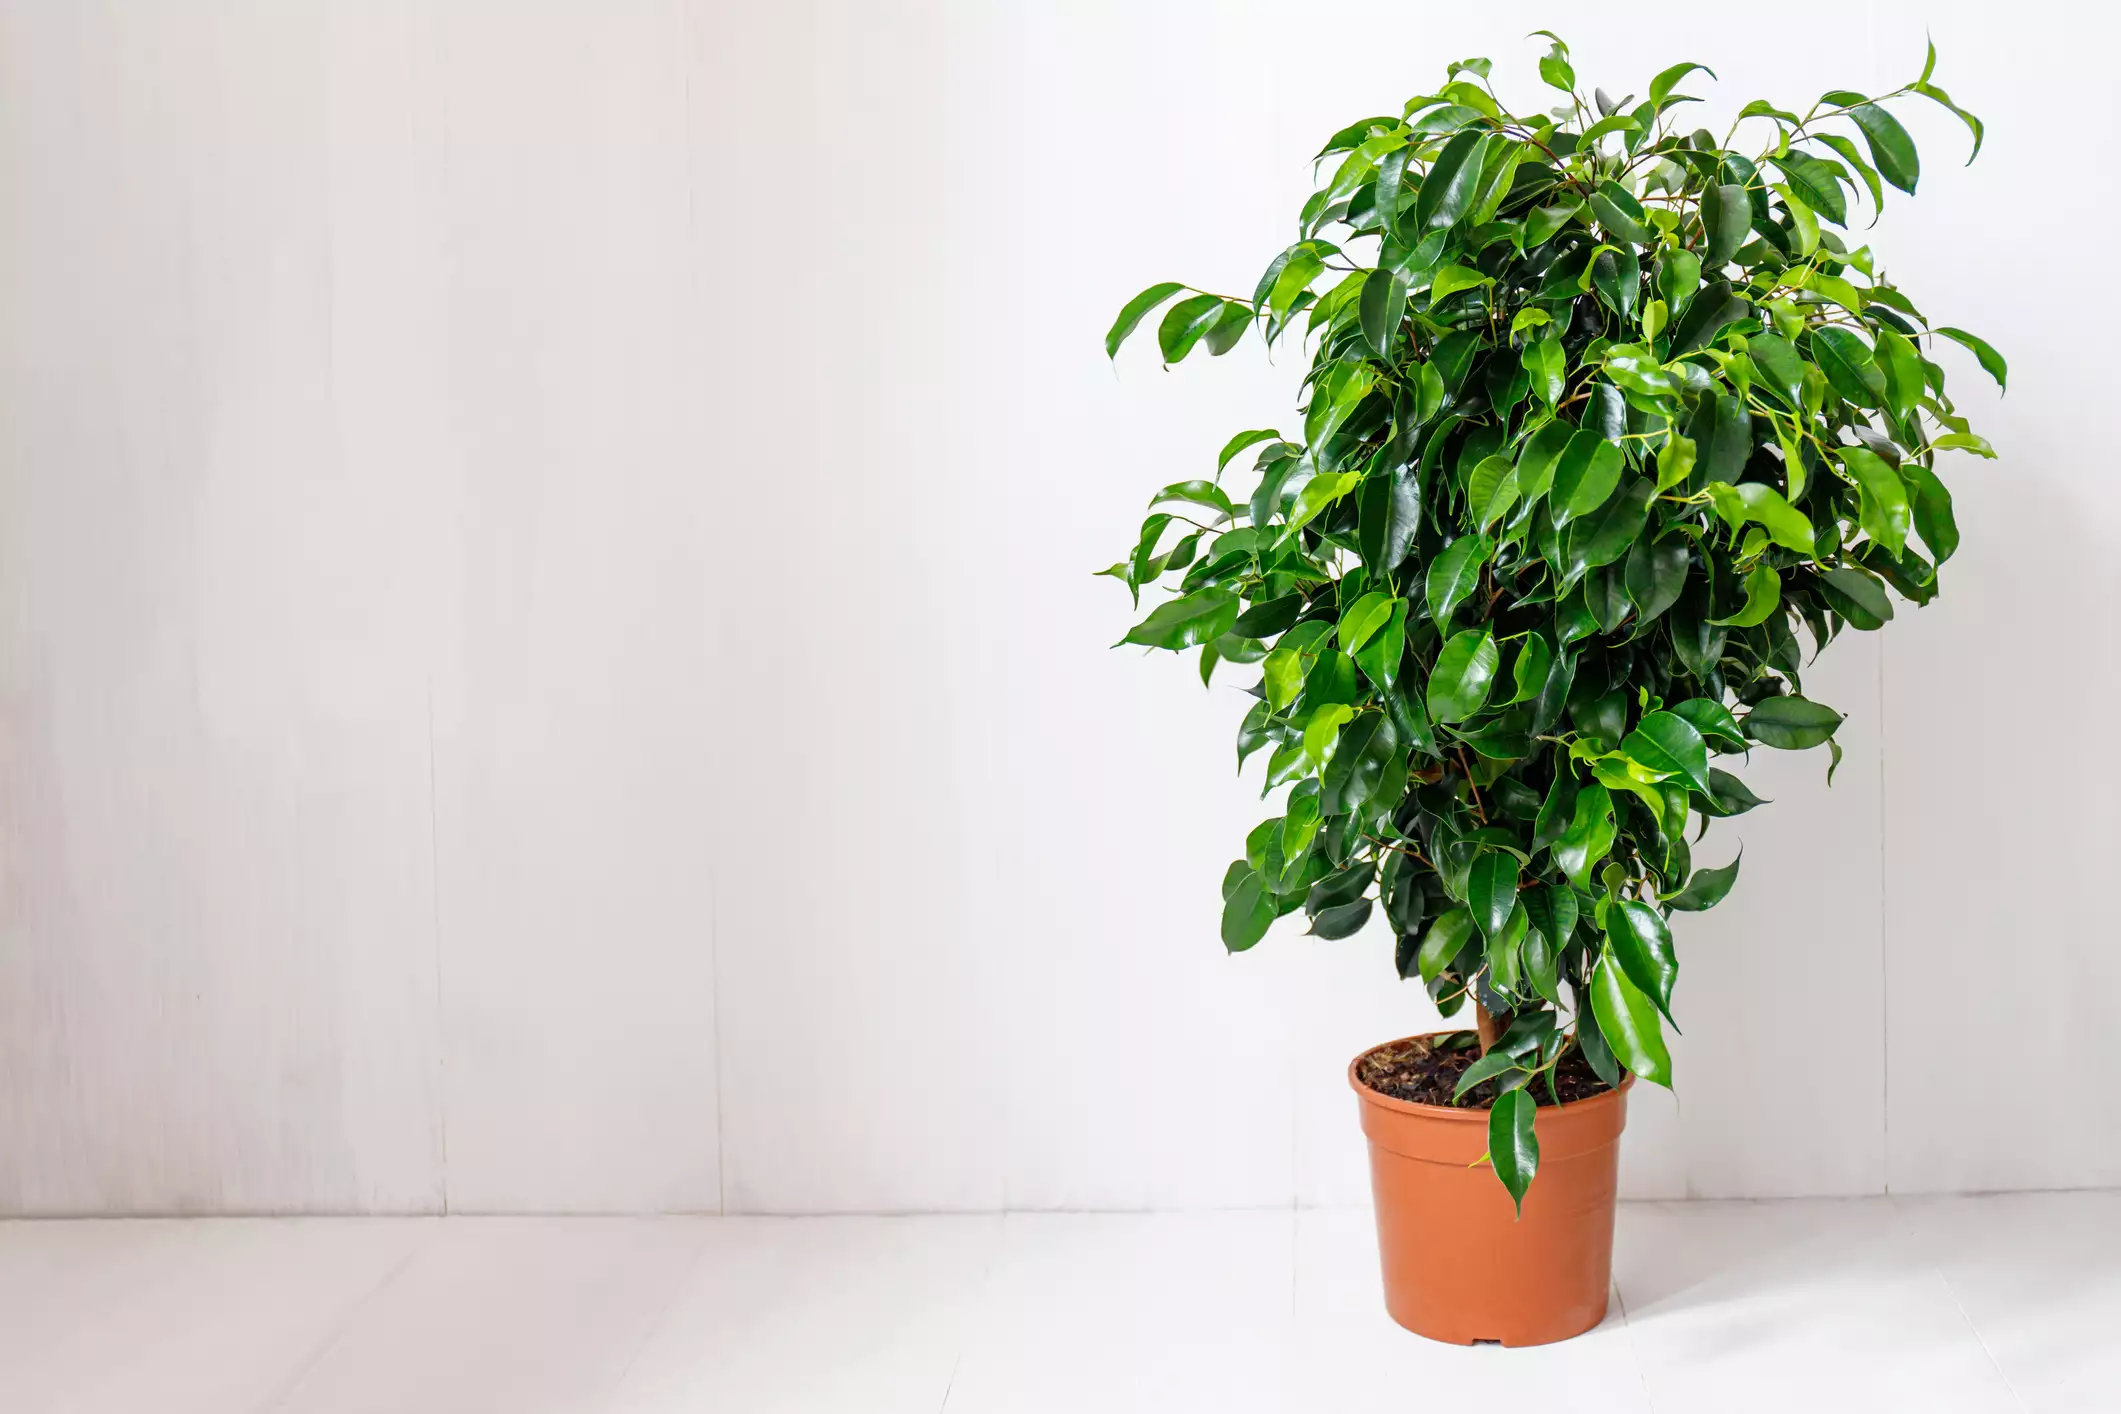 Ficus benjamina (weeping fig) against a white wall.